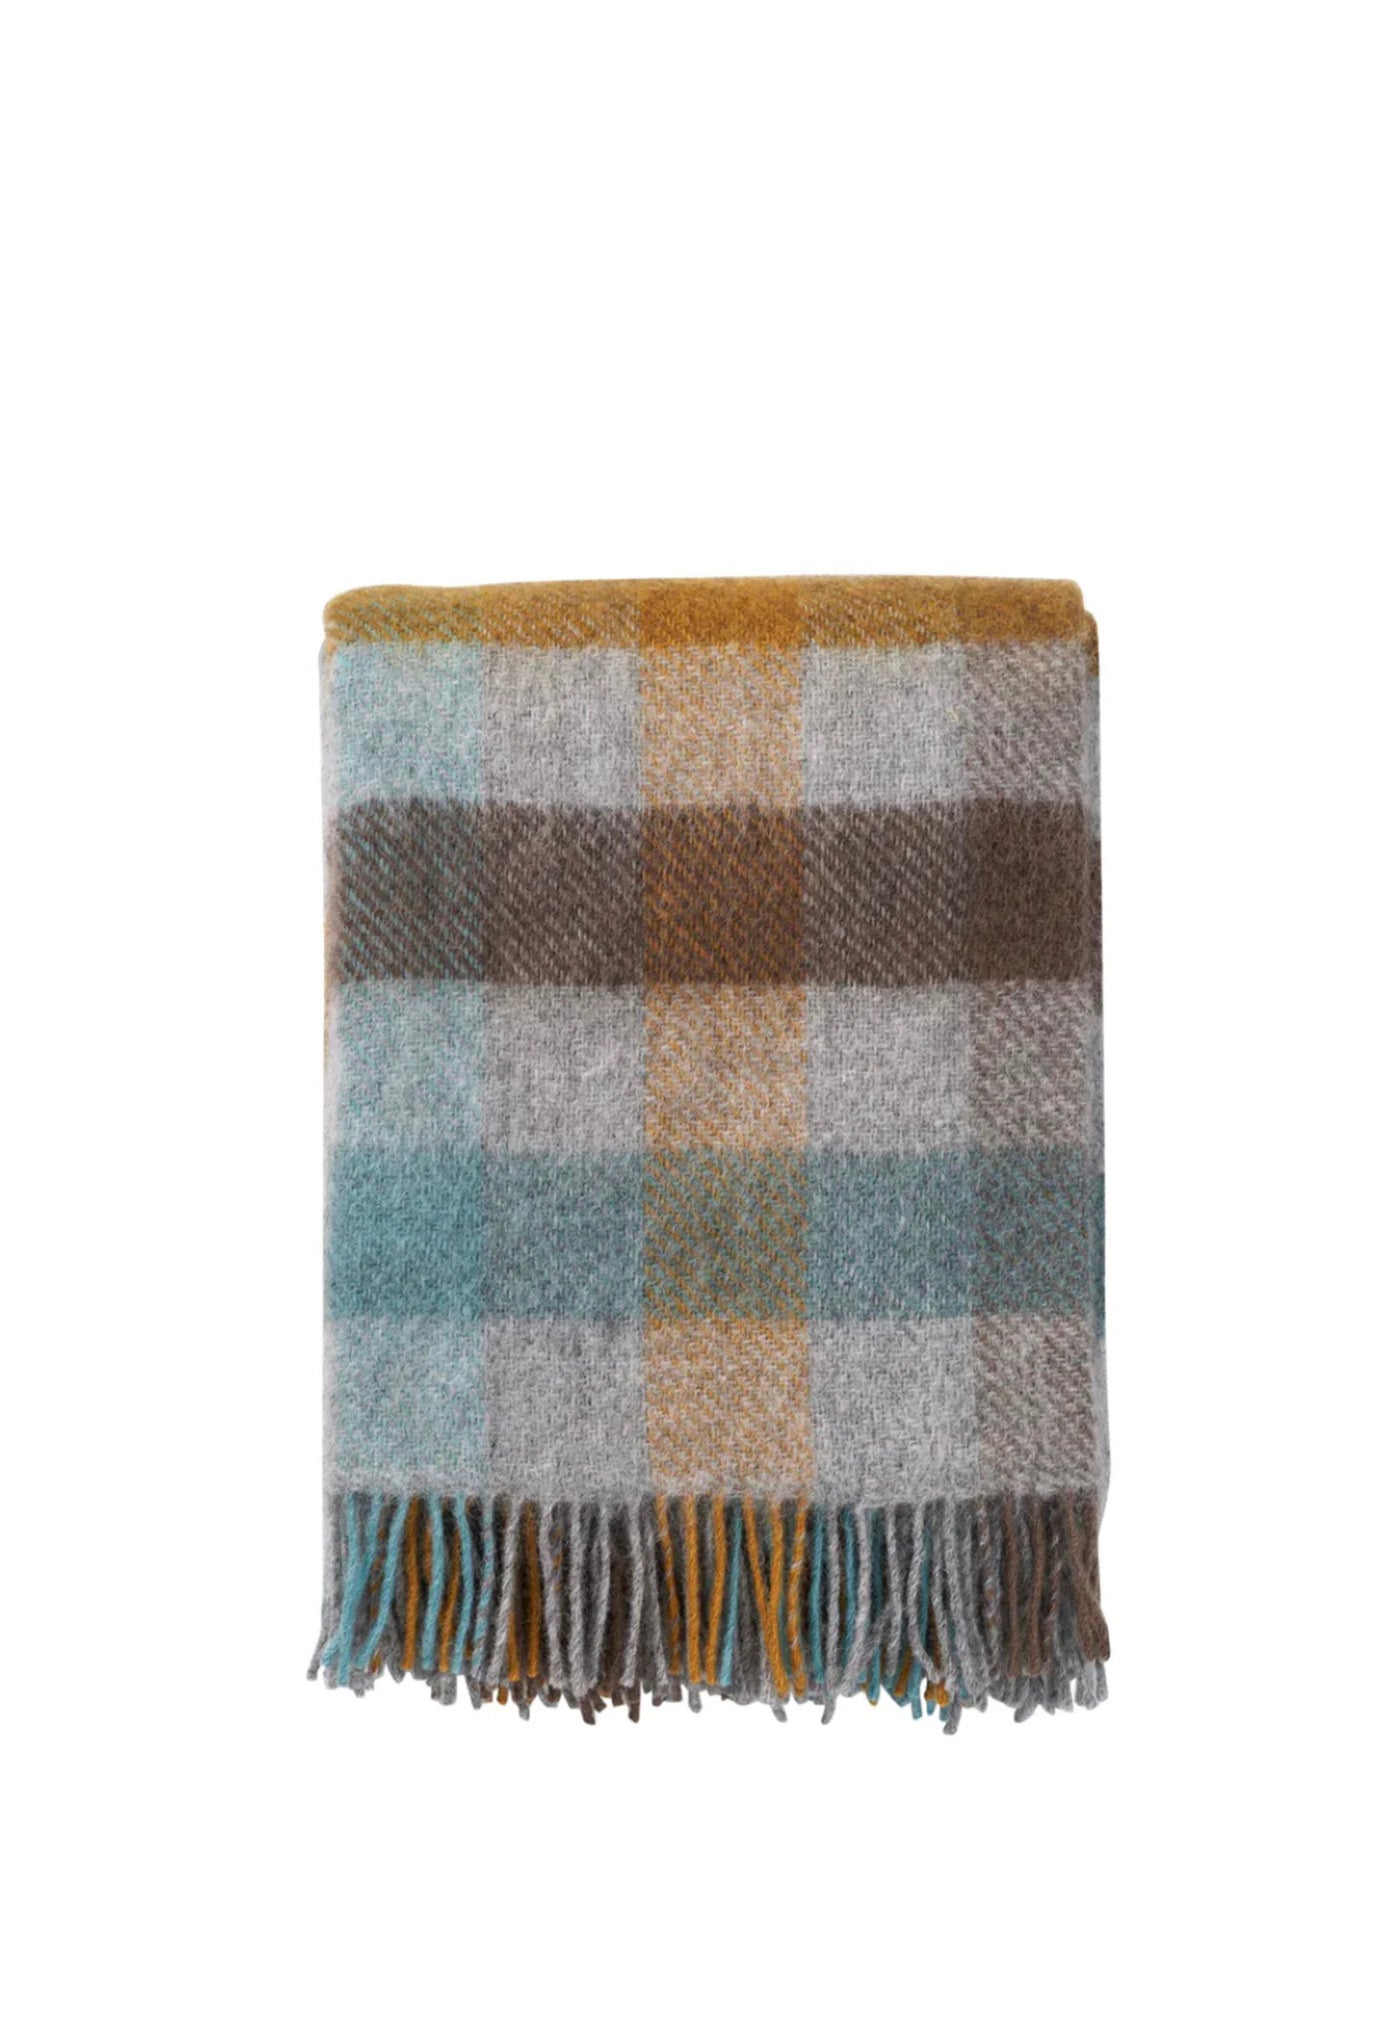 Gotland Wool Throw - Multi Turquoise sold by Angel Divine